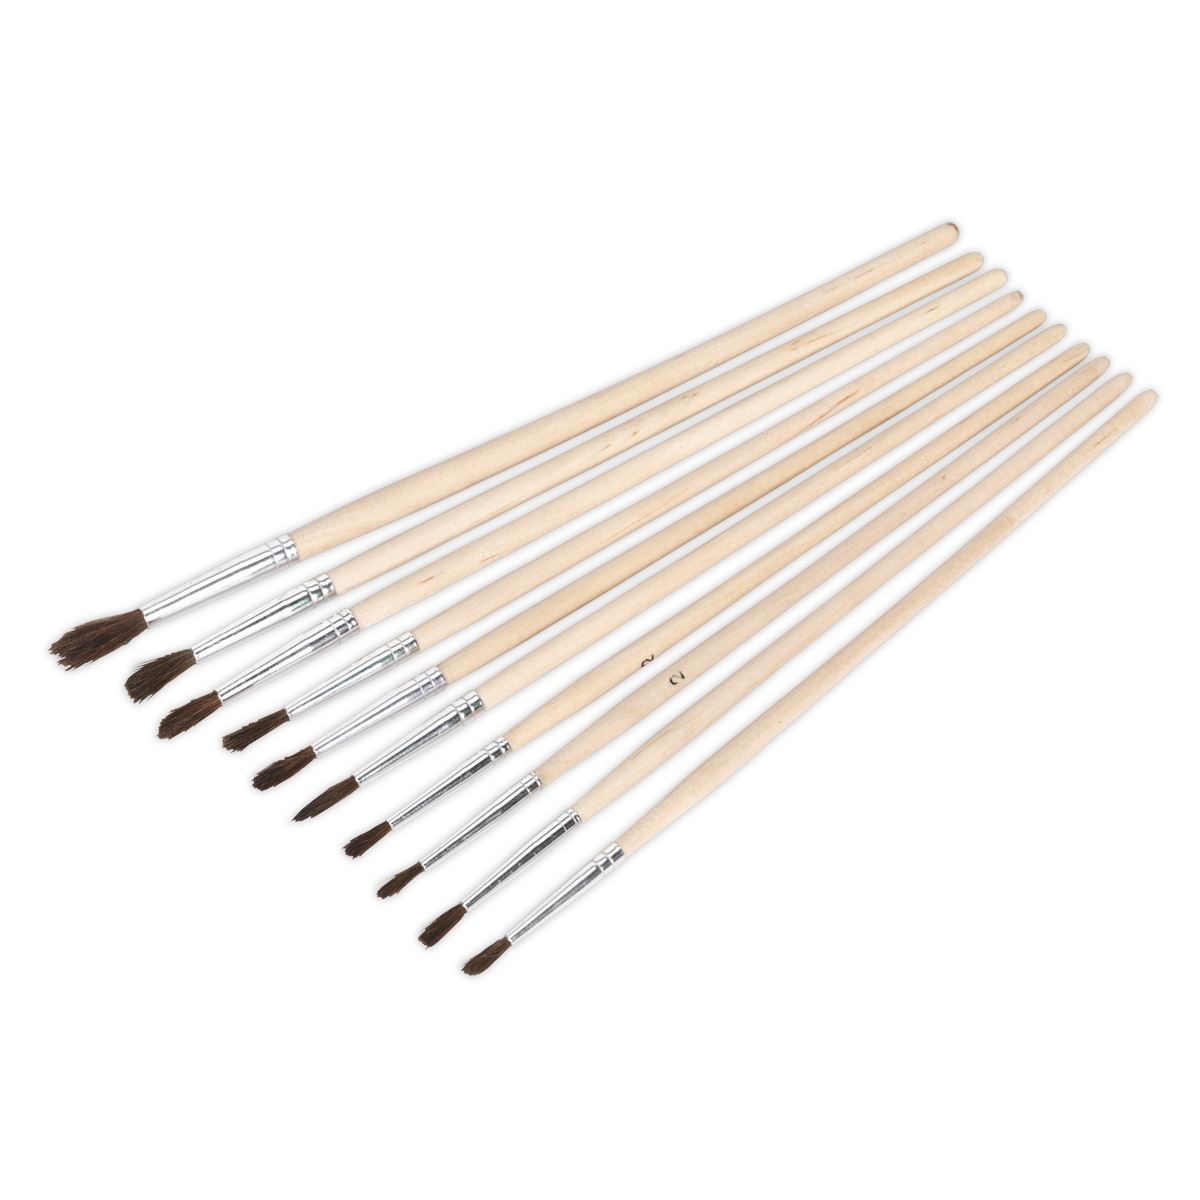 Sealey Touch-Up Paint Brush Assortment 10pc Wooden Handle